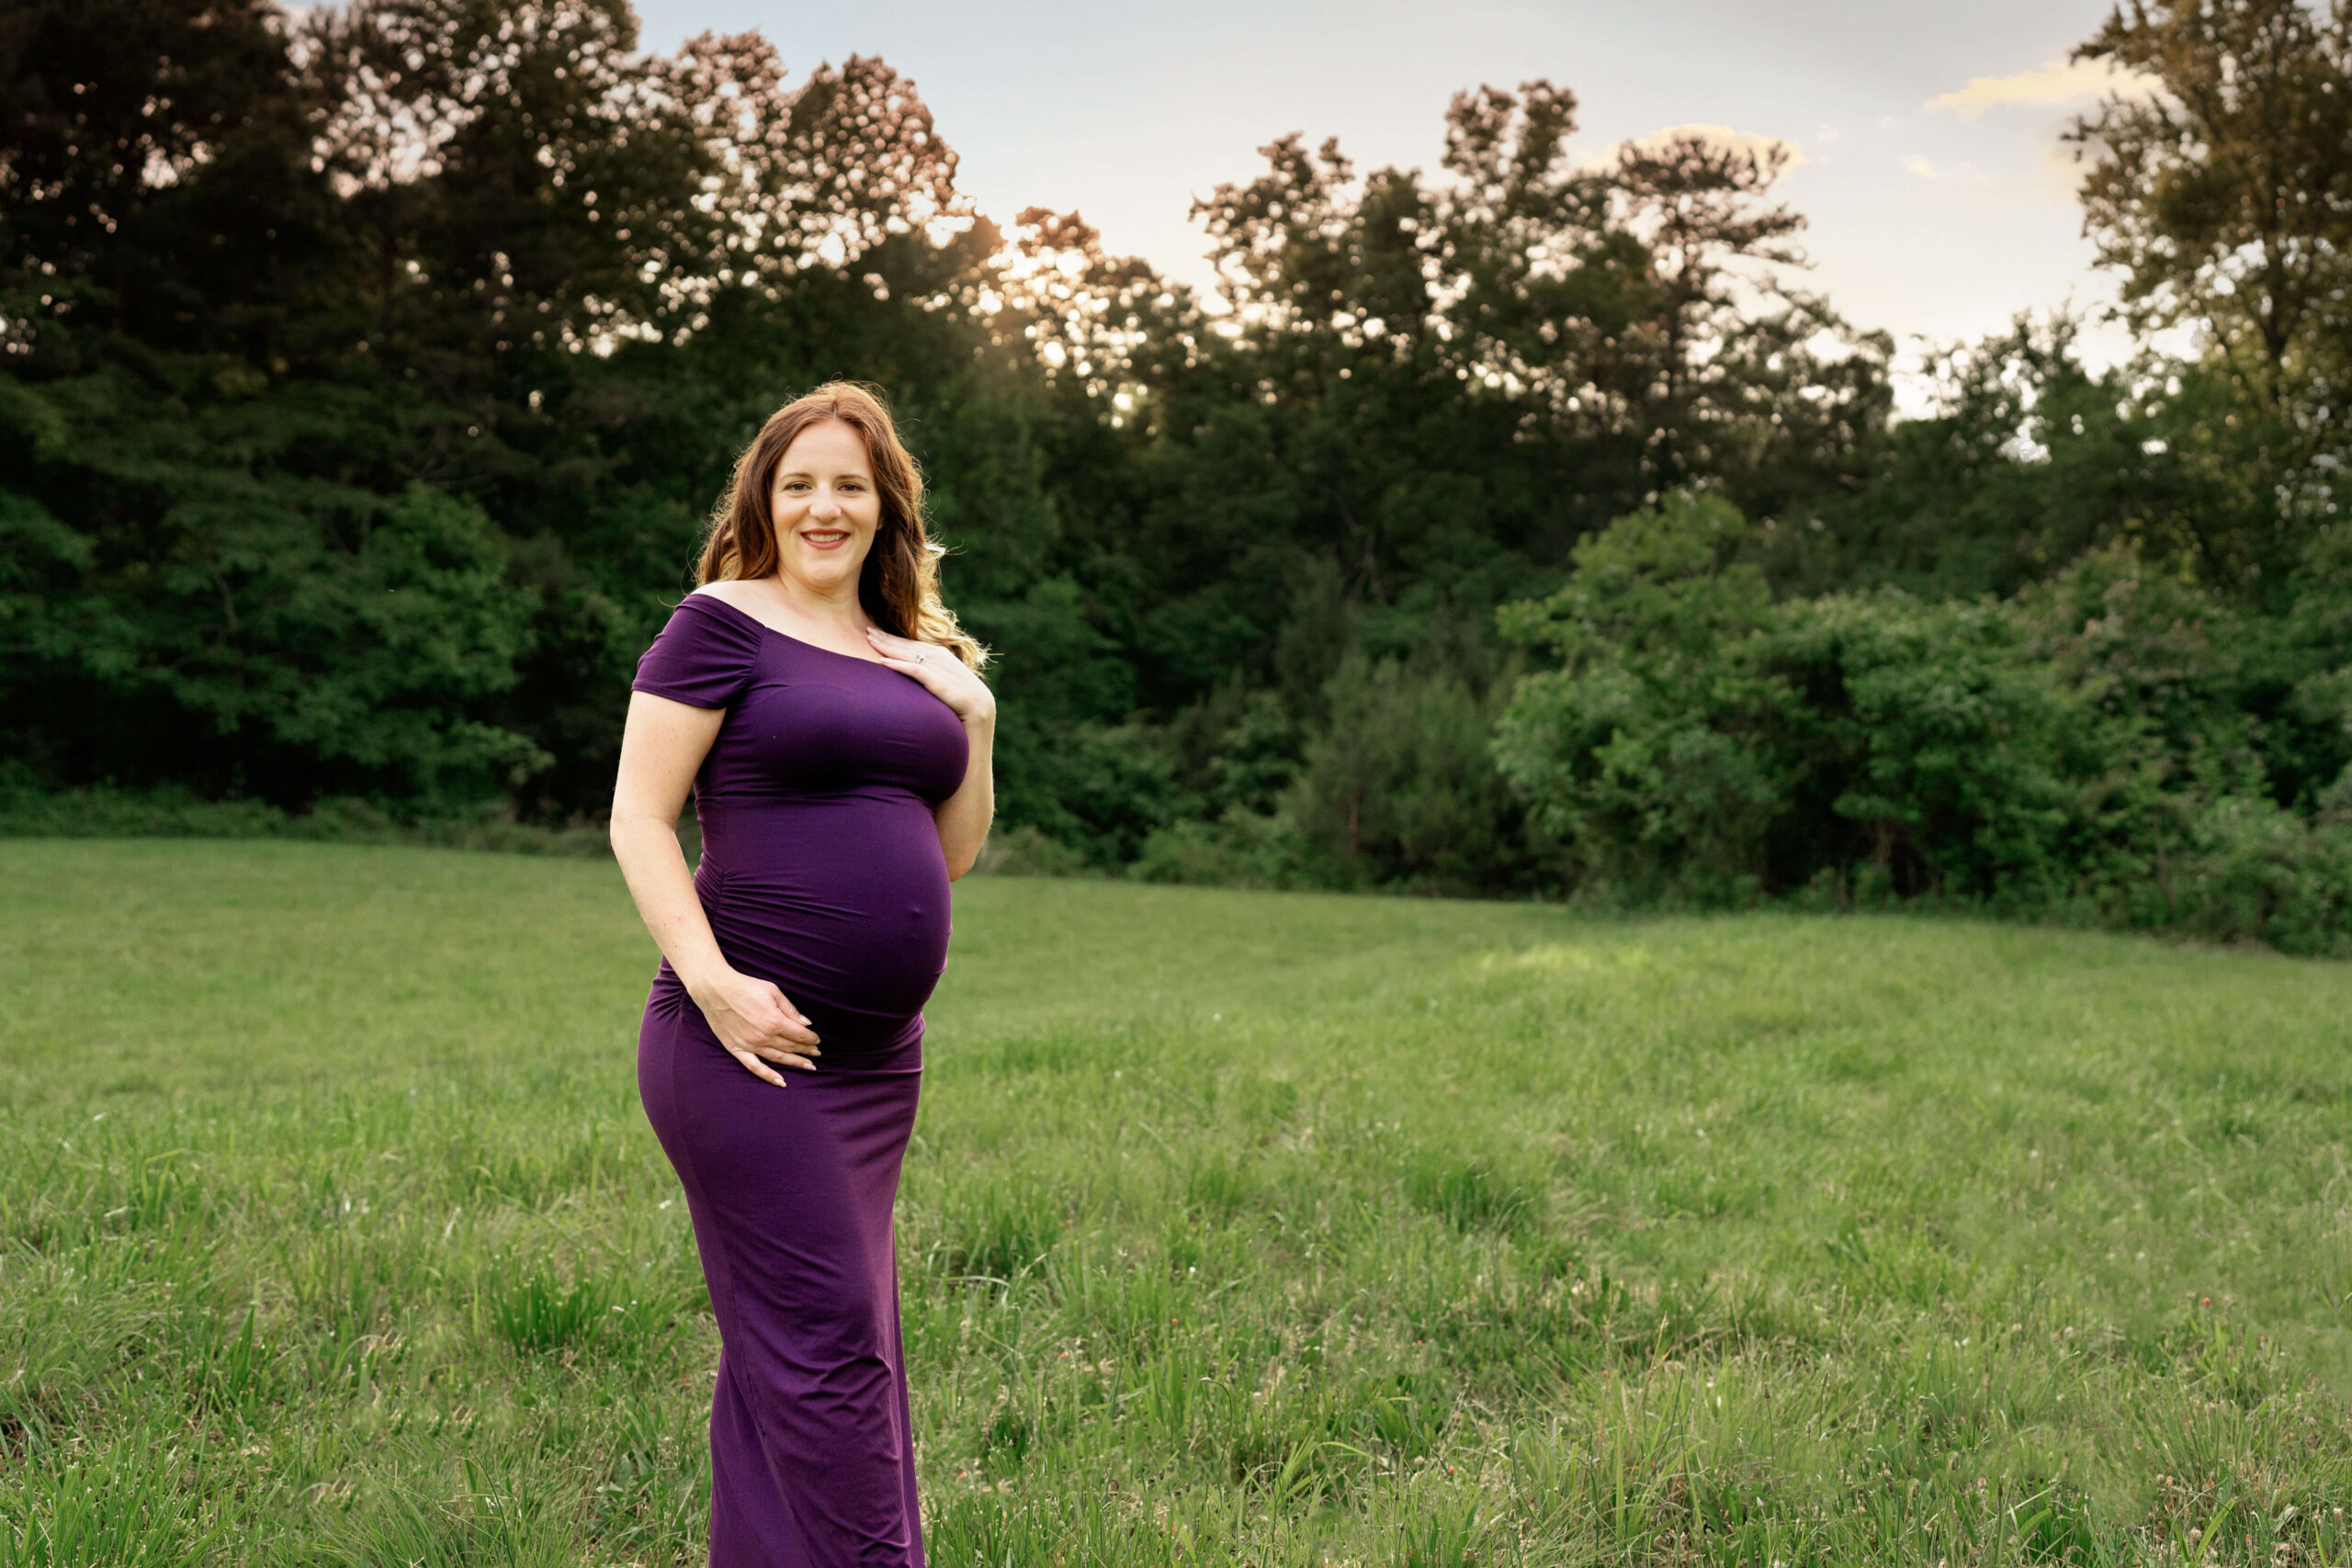 Pregnant woman in field in purple dress smiling at camera.